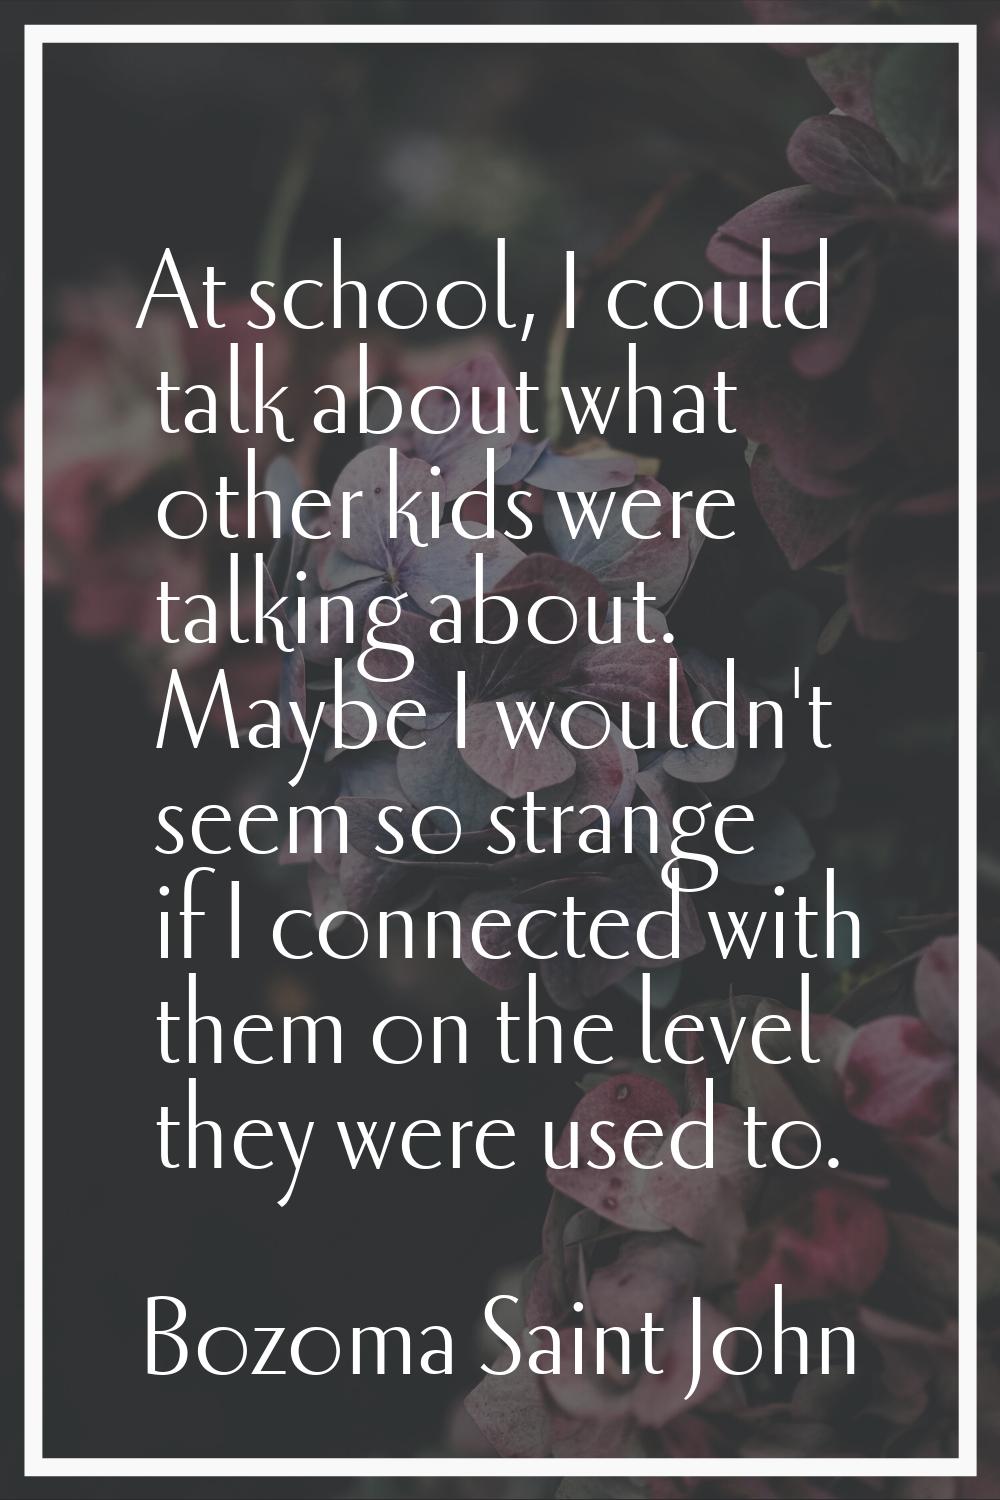 At school, I could talk about what other kids were talking about. Maybe I wouldn't seem so strange 